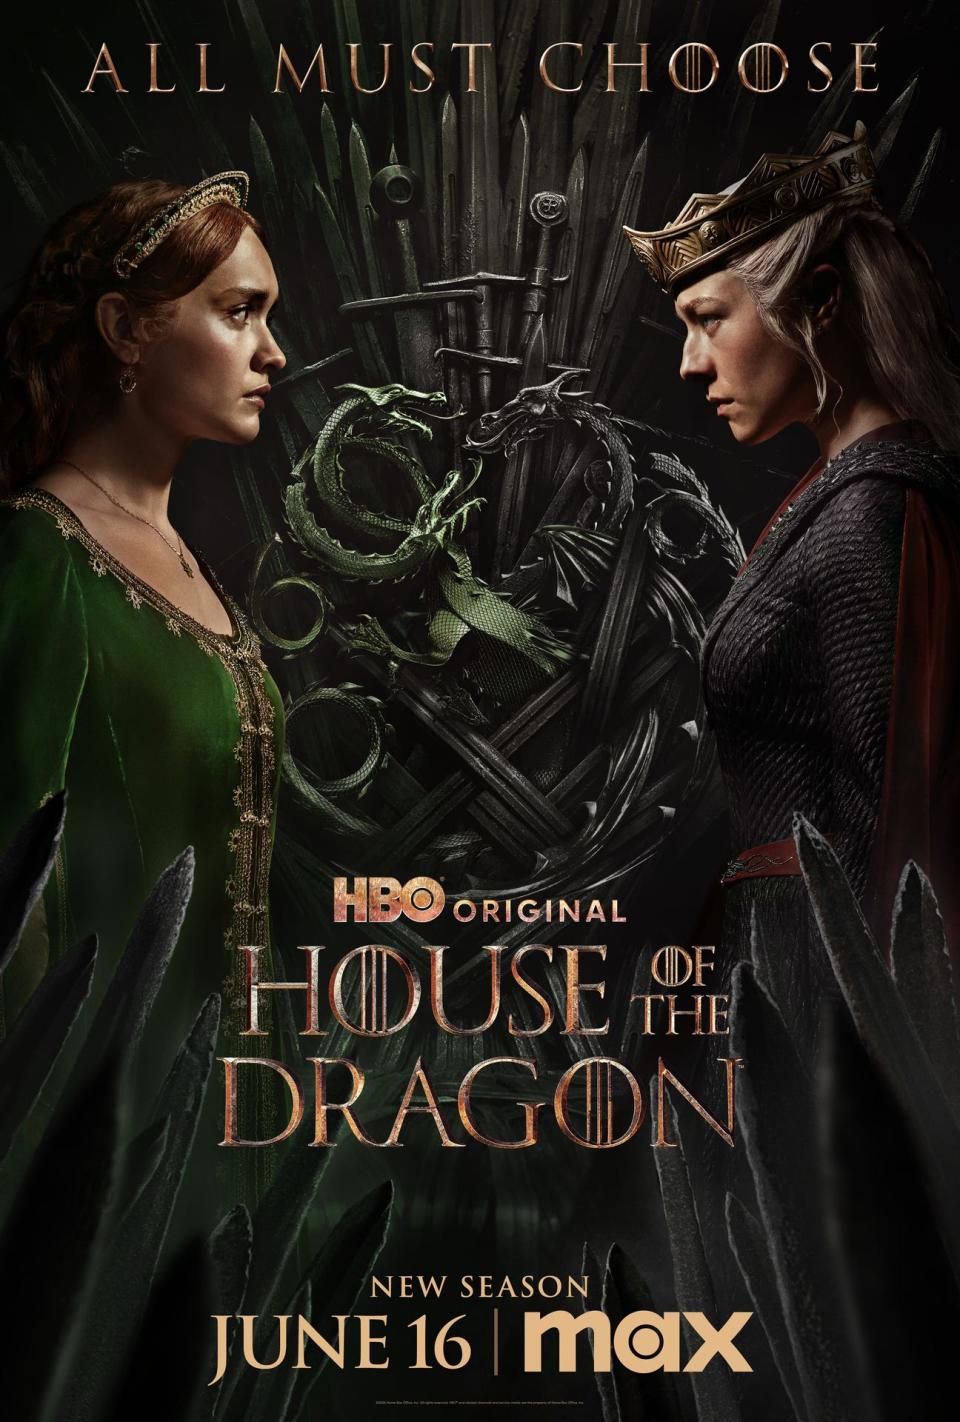 "House of the Dragon" Season 2 will premiere at 9 p.m. ET/PT on Sunday, June 16.